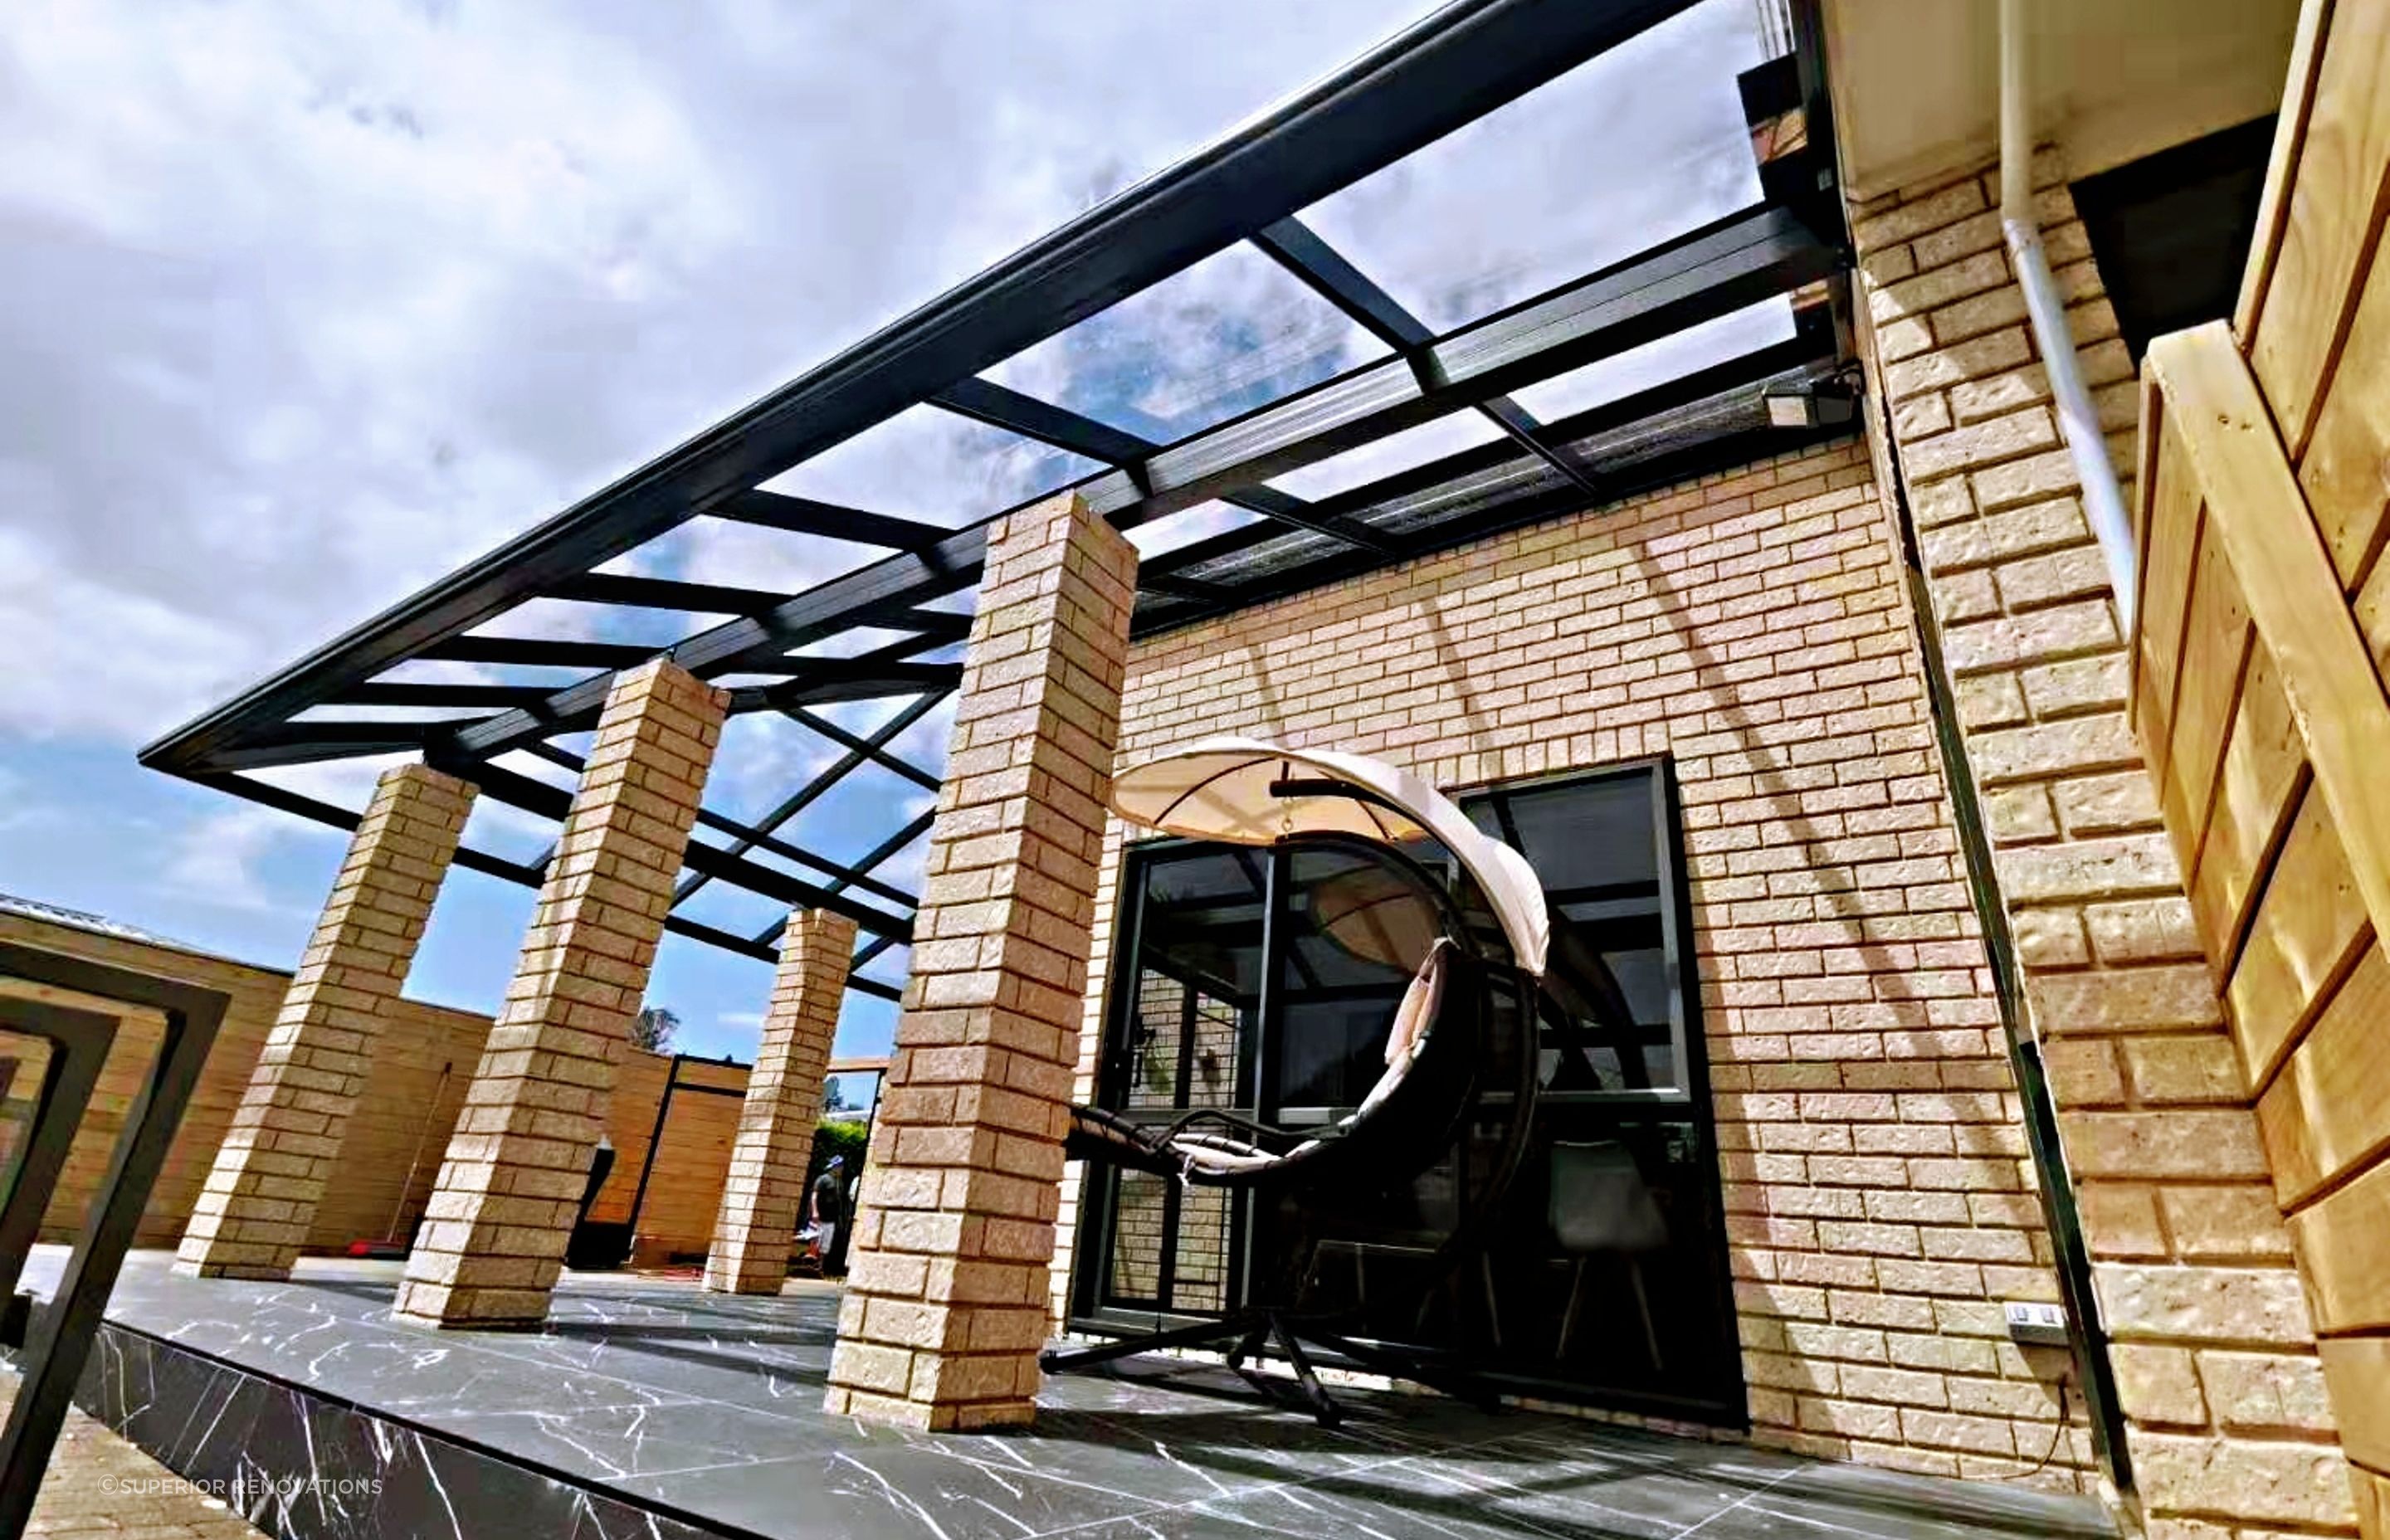 This Pergola we built so our clients could enjoy all kinds of weather and not just to provide shade and hence we used glass roofing for the pergola.